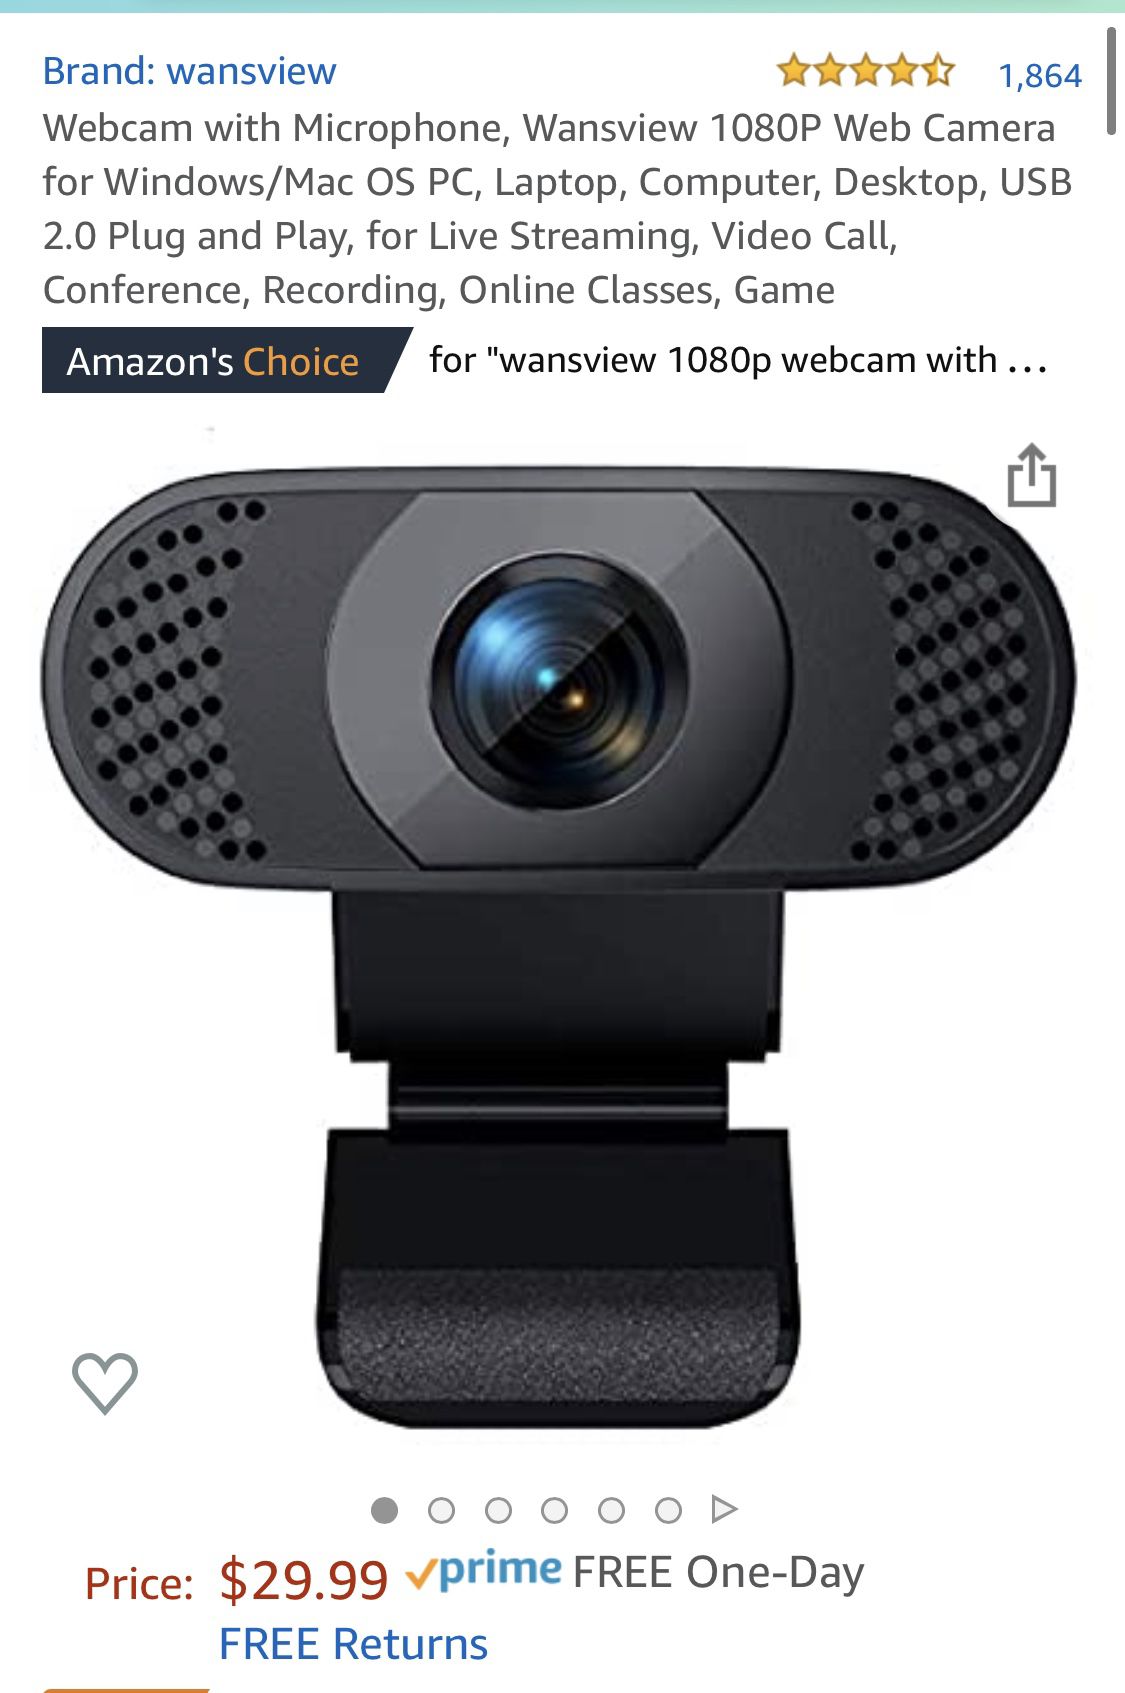 Webcam with Microphone, Wansview 1080P Web Camera for Windows/Mac OS PC, Laptop, Computer, Desktop, USB 2.0 Plug and Play, for Live Streaming, Video